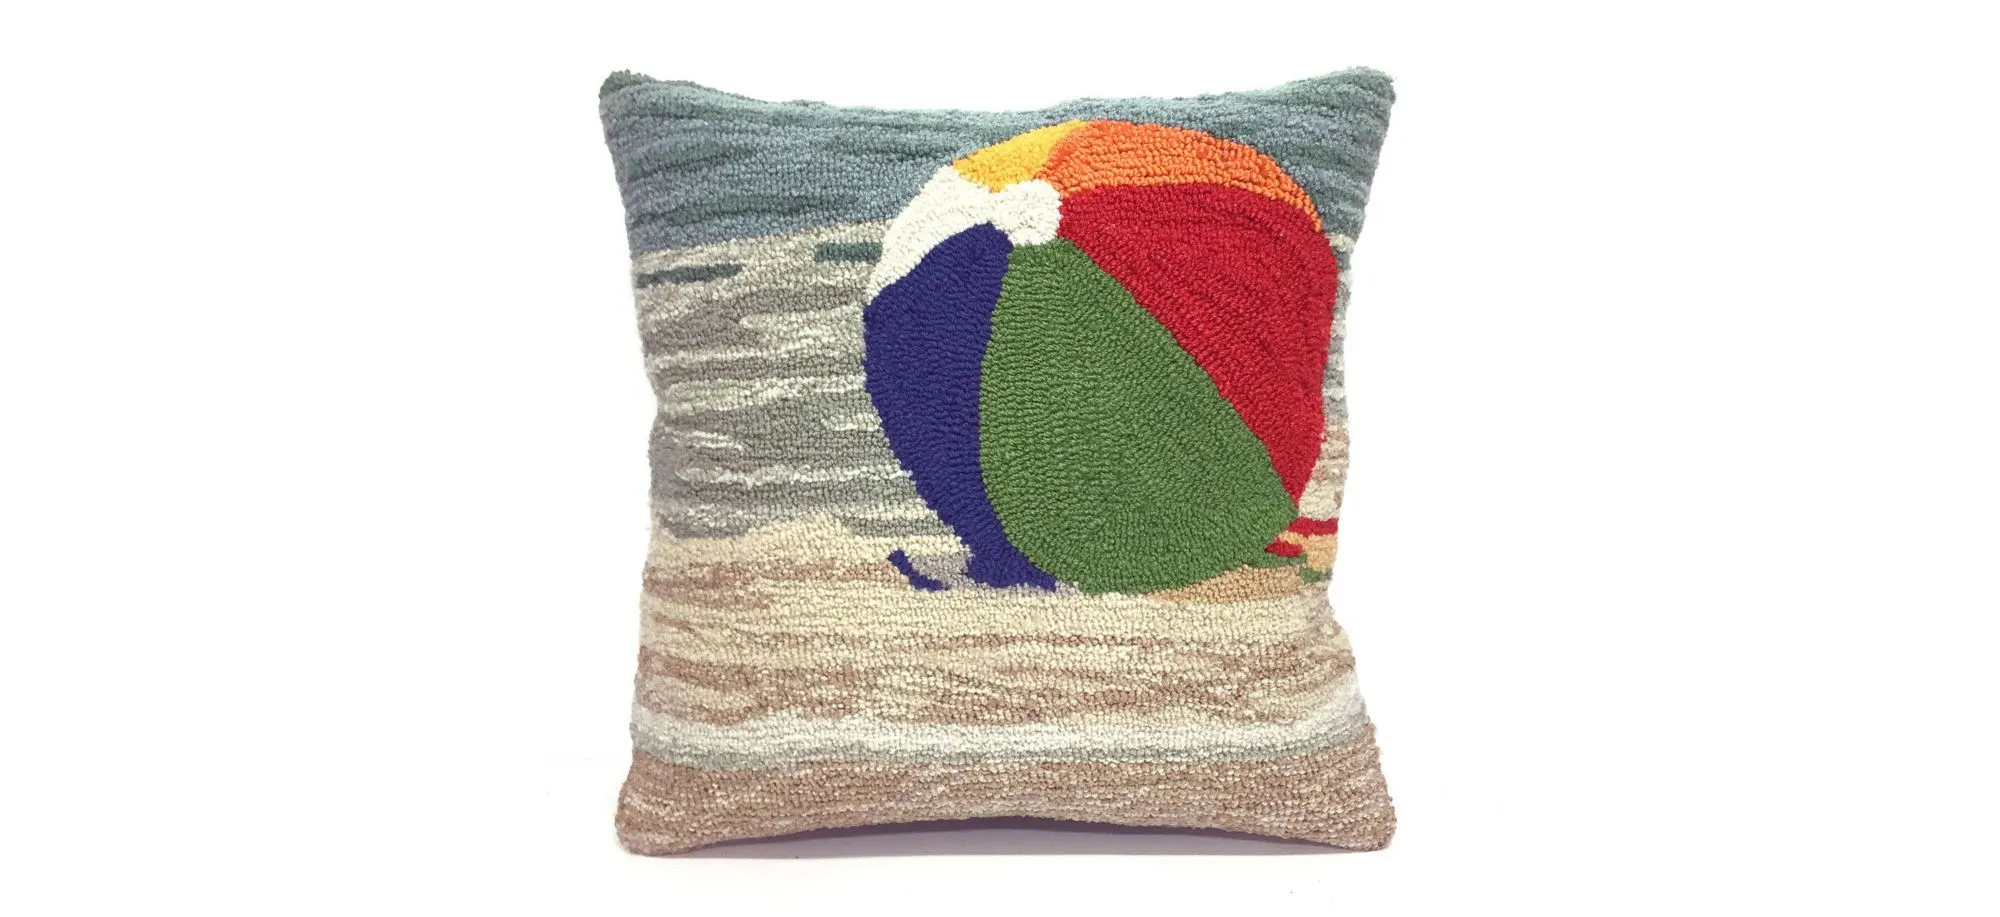 Liora Manne Frontporch Life's A Beach Pillow in Multi by Trans-Ocean Import Co Inc